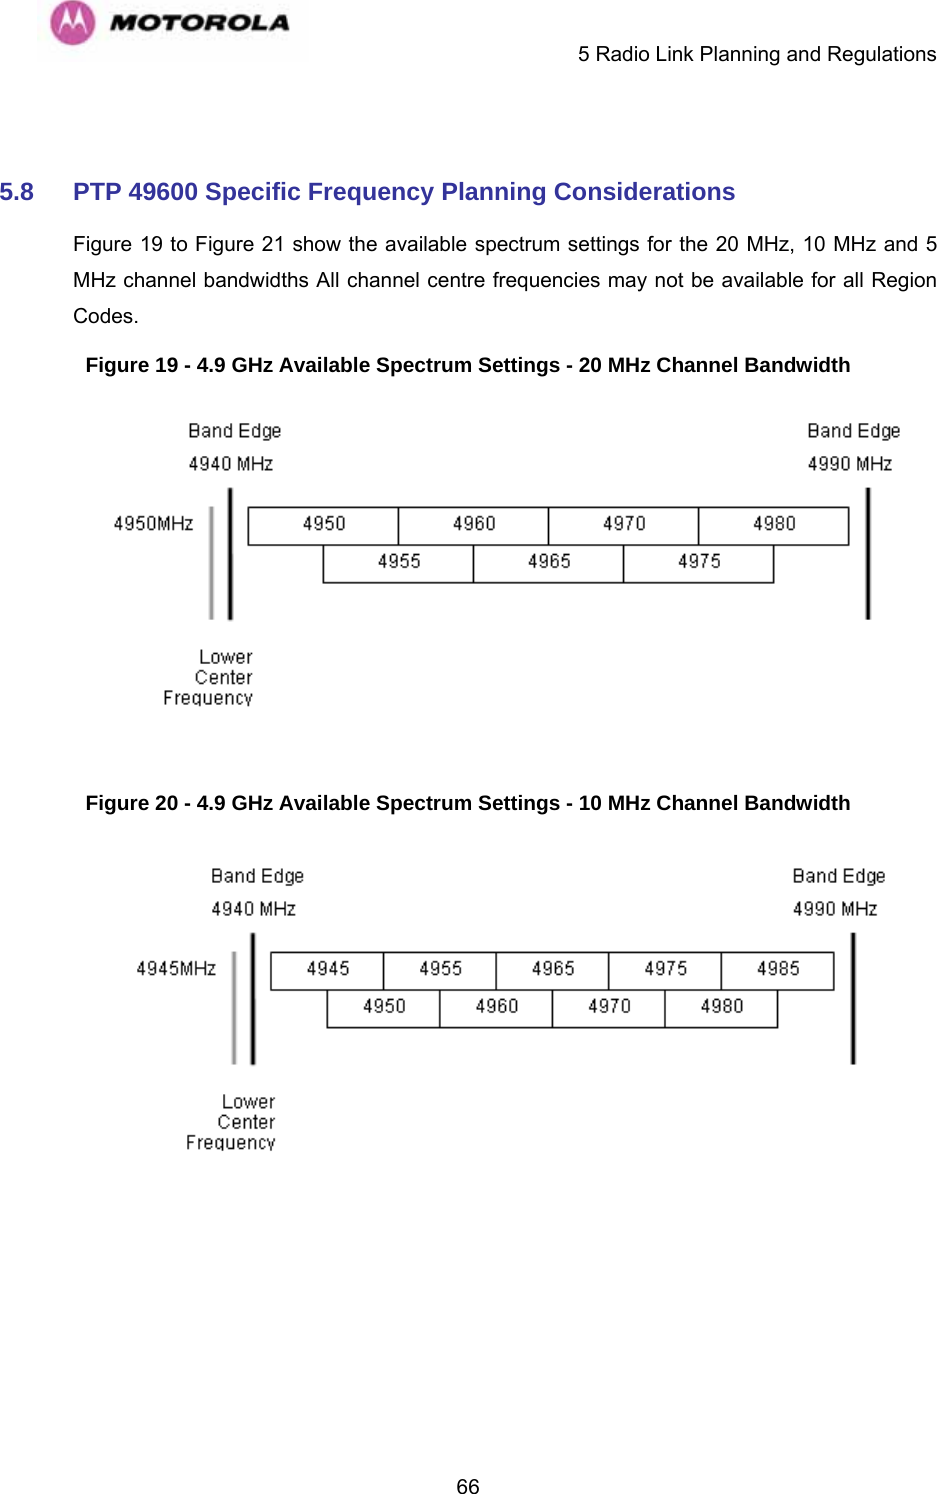     5 Radio Link Planning and Regulations  66 5.8  PTP 49600 Specific Frequency Planning Considerations Figure 19 to Figure 21 show the available spectrum settings for the 20 MHz, 10 MHz and 5 MHz channel bandwidths All channel centre frequencies may not be available for all Region Codes. Figure 19 - 4.9 GHz Available Spectrum Settings - 20 MHz Channel Bandwidth   Figure 20 - 4.9 GHz Available Spectrum Settings - 10 MHz Channel Bandwidth   